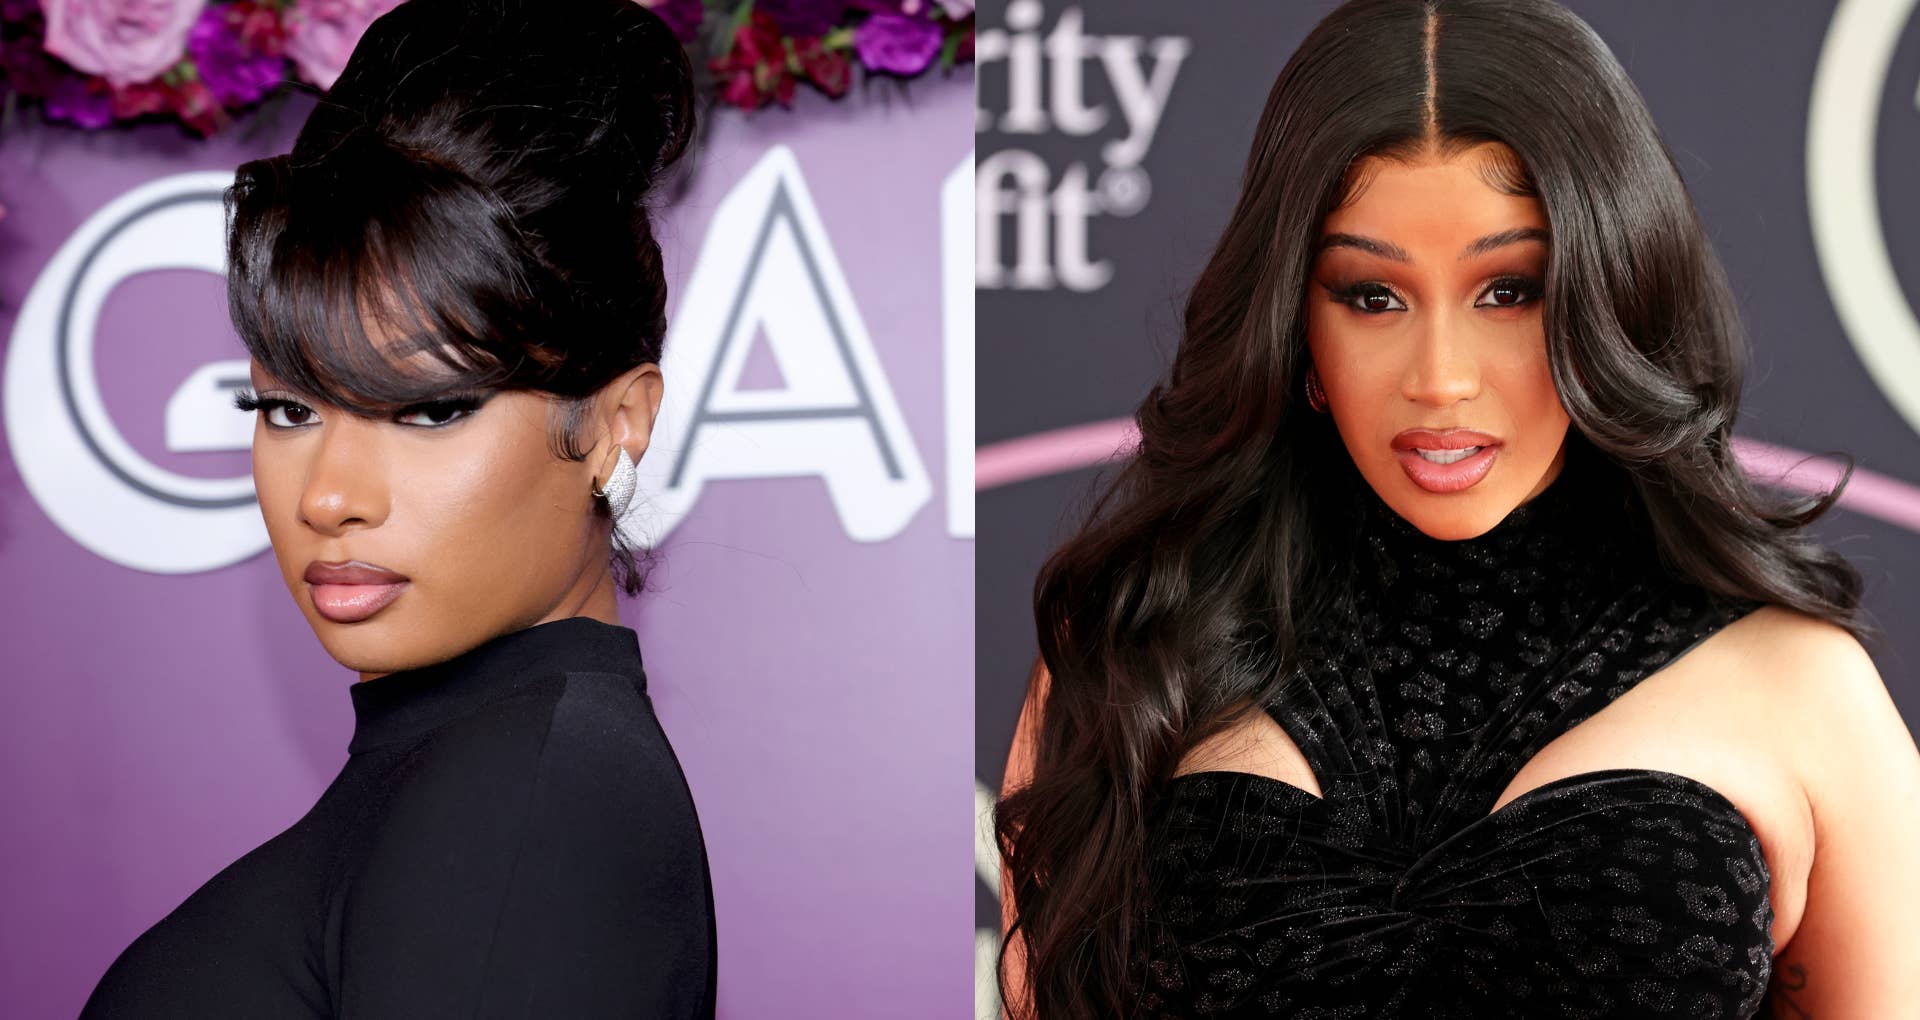 This is an image of Megan Thee Stallion on the left and Cardi B on the right